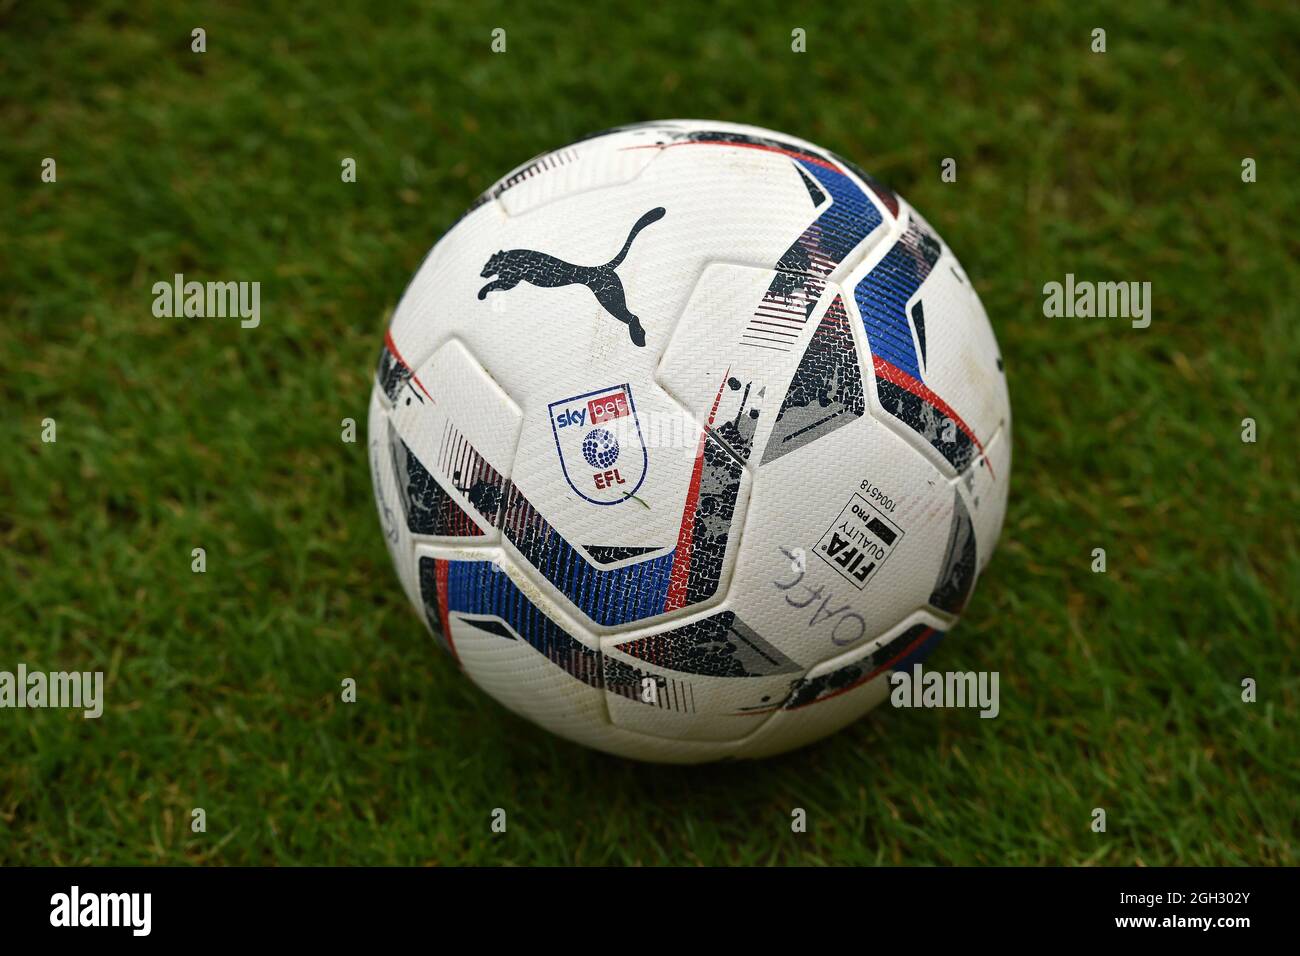 OLDHAM, UK. SEPT 4TH Puma EFL ball during the Sky Bet League 2 match between Oldham Athletic and Barrow at Boundary Park, Oldham on Saturday 4th September 2021. (Photo by: Eddie Garvey | MI News) Credit: MI News & Sport /Alamy Live News Stock Photo